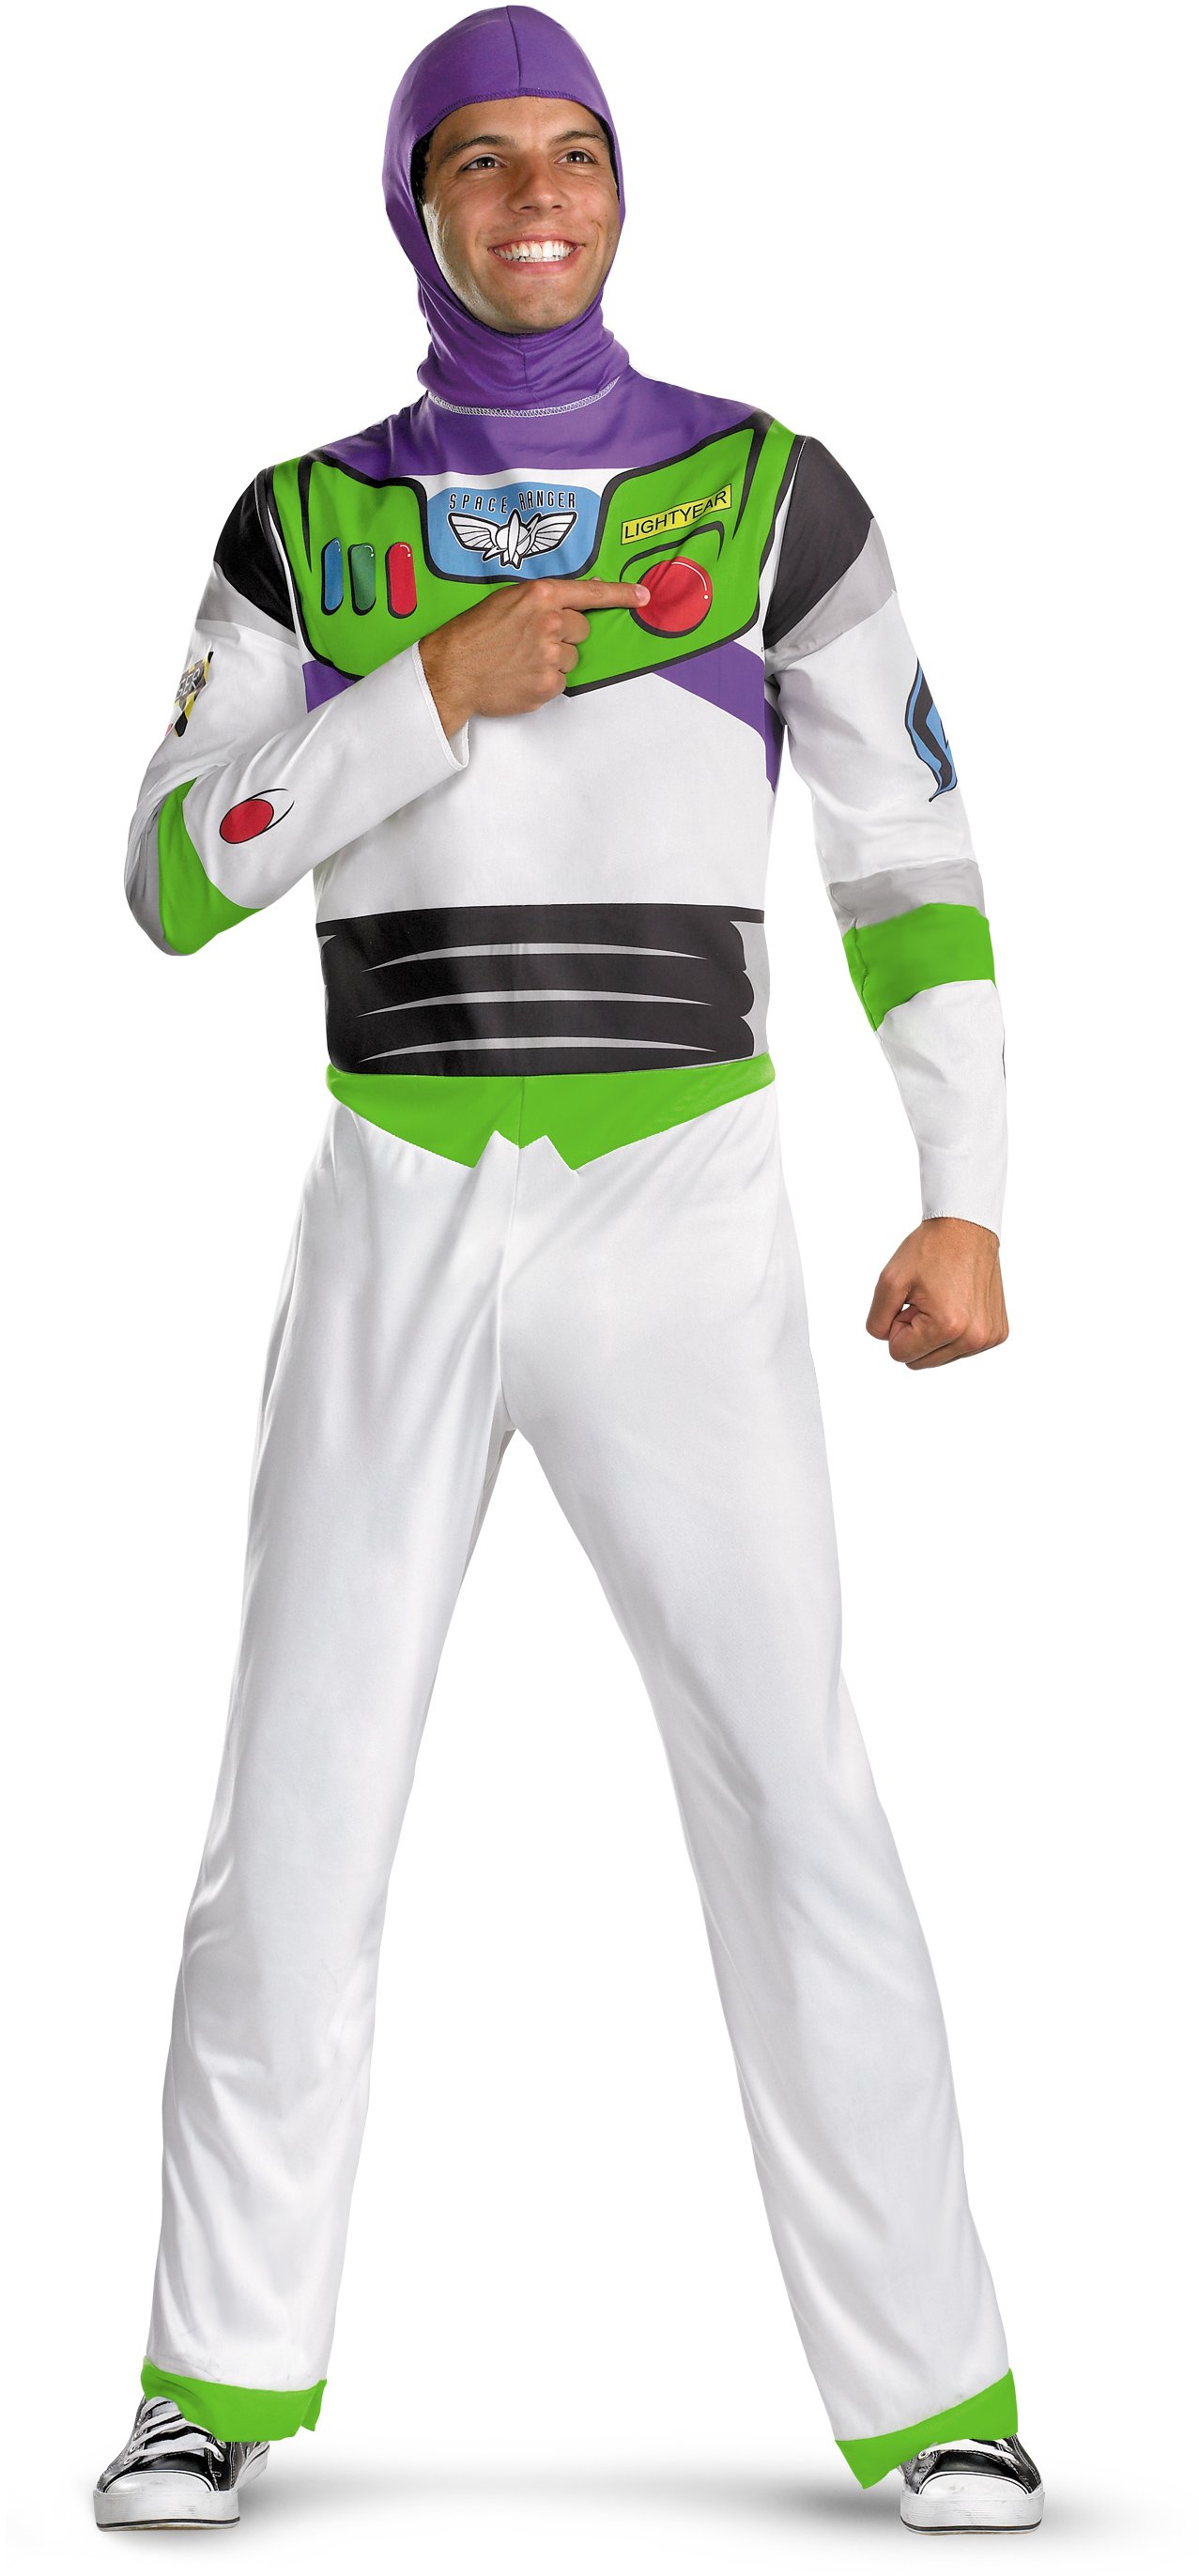 Toy Story - Buzz Lightyear Adult Costume